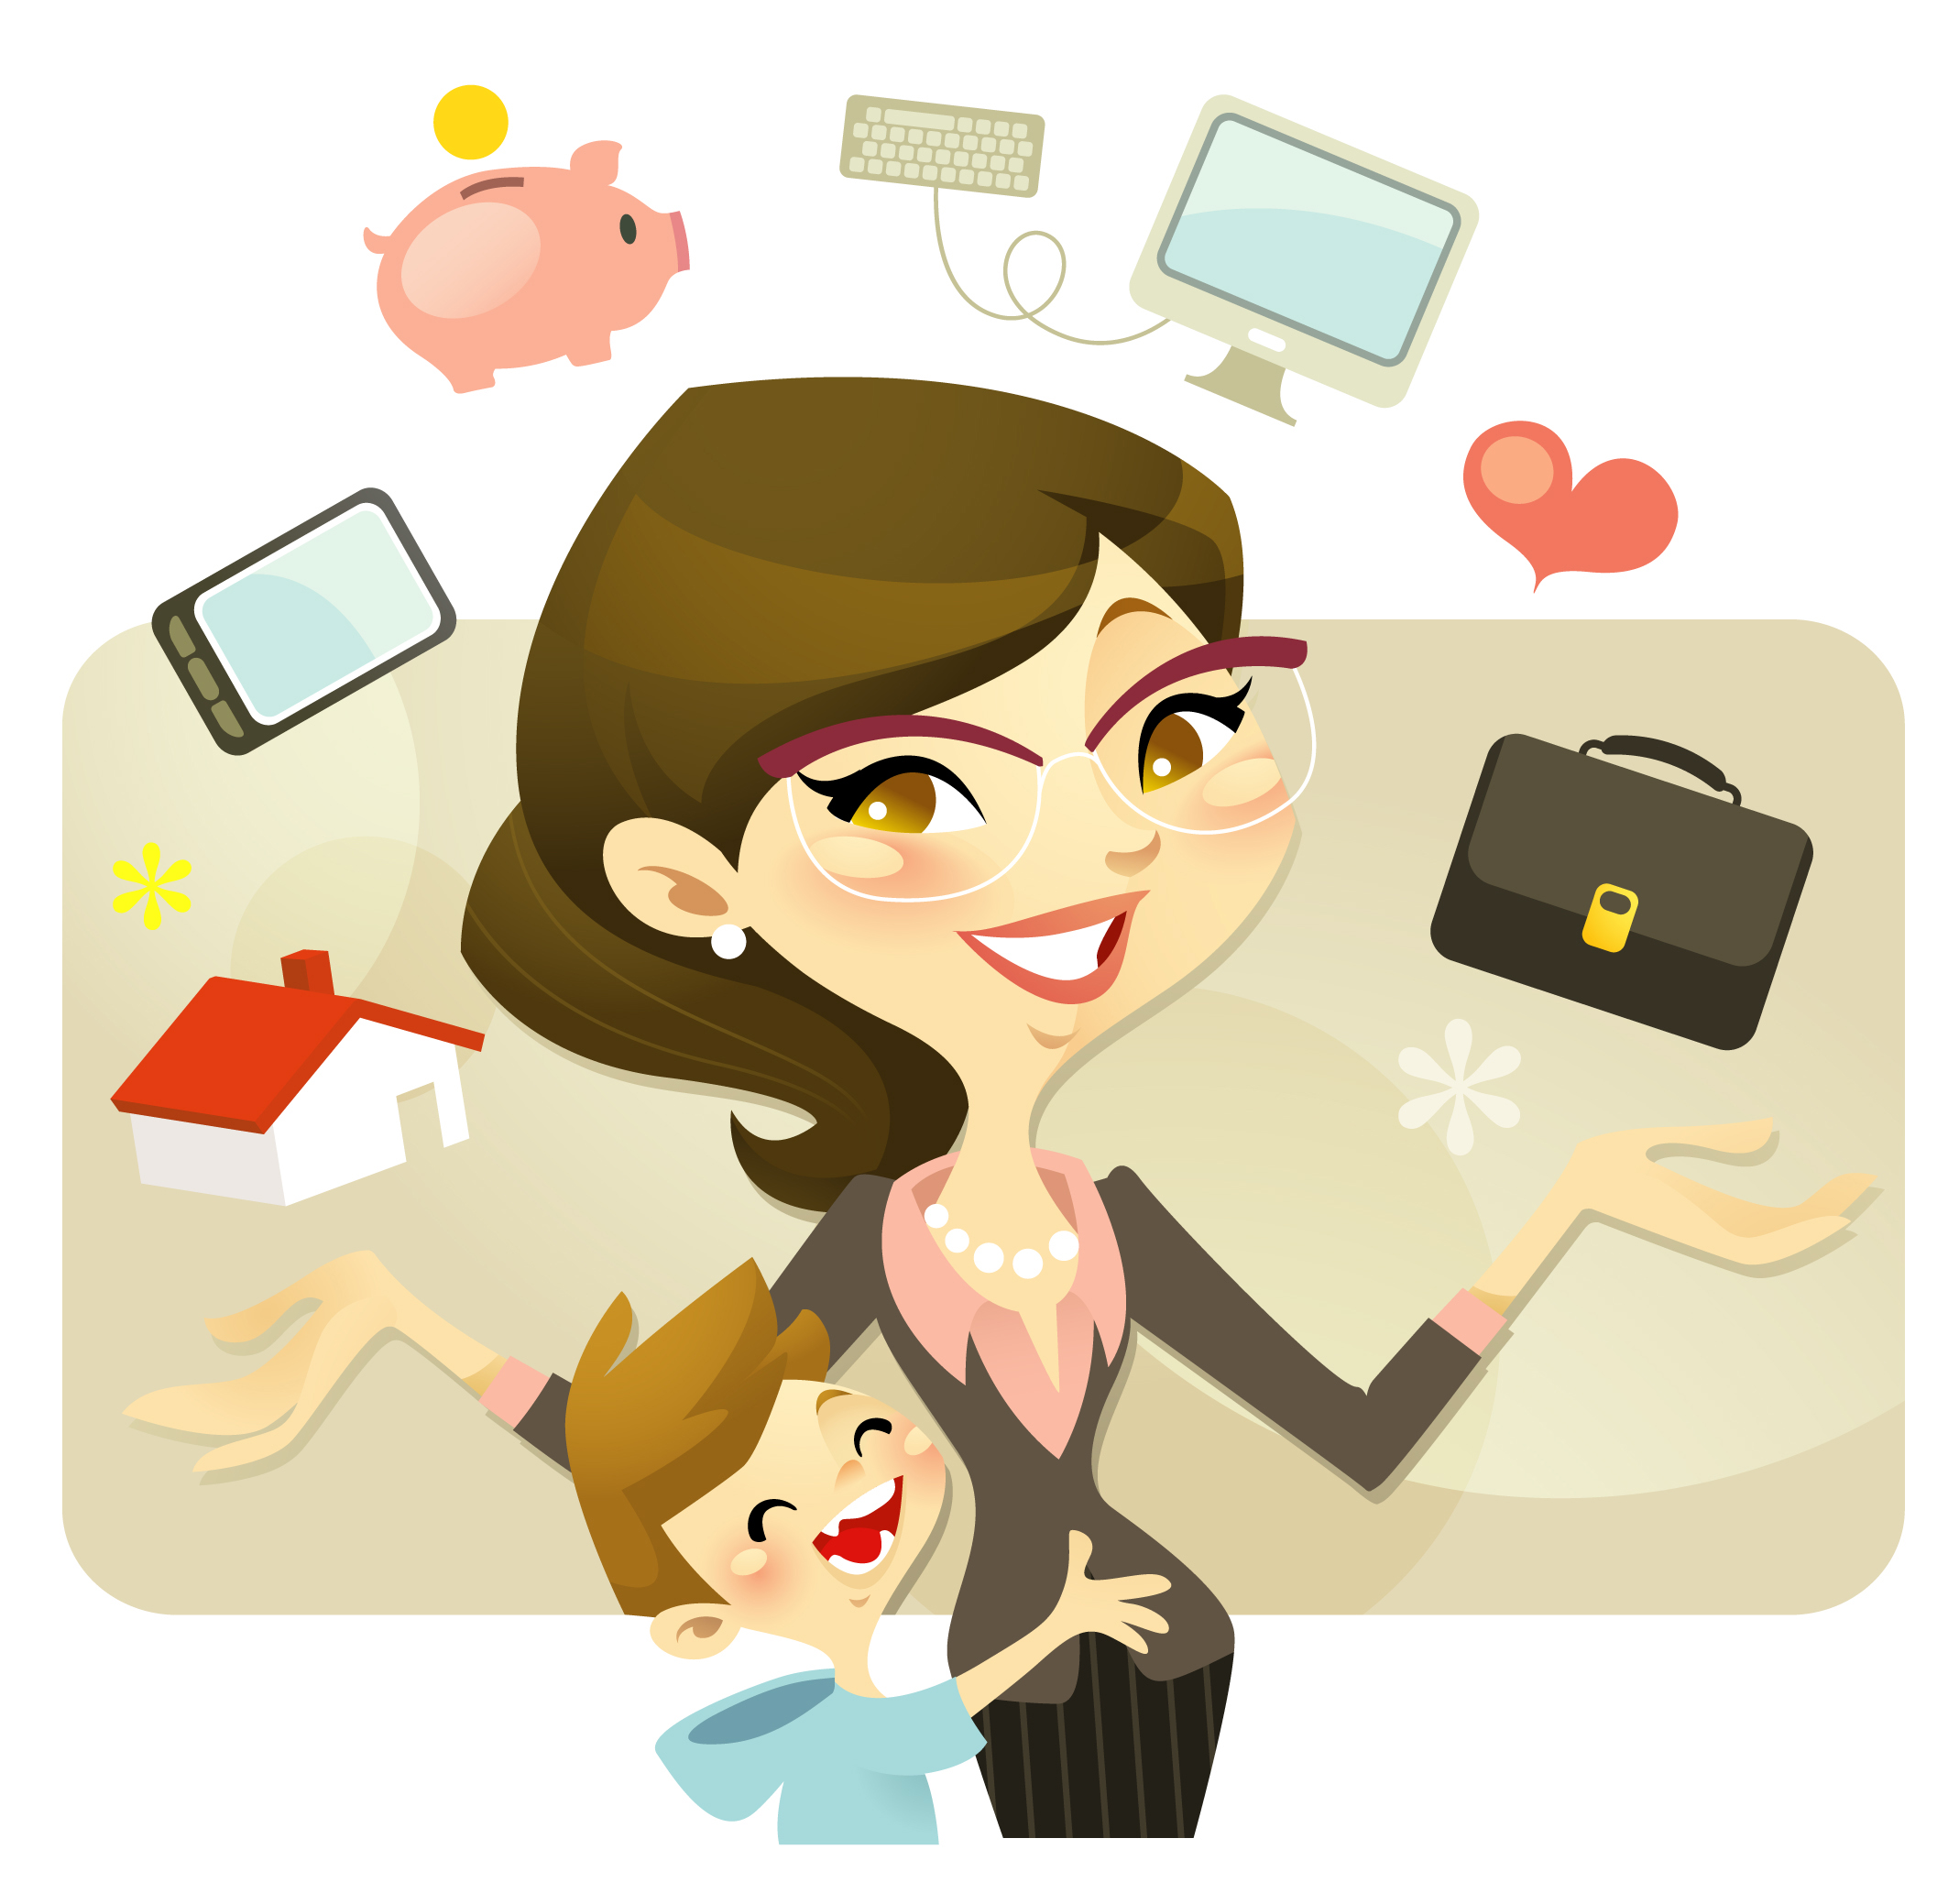 Administrative Assistant Cliparts Add A Touch Of Efficiency And Professionalism To Your Designs